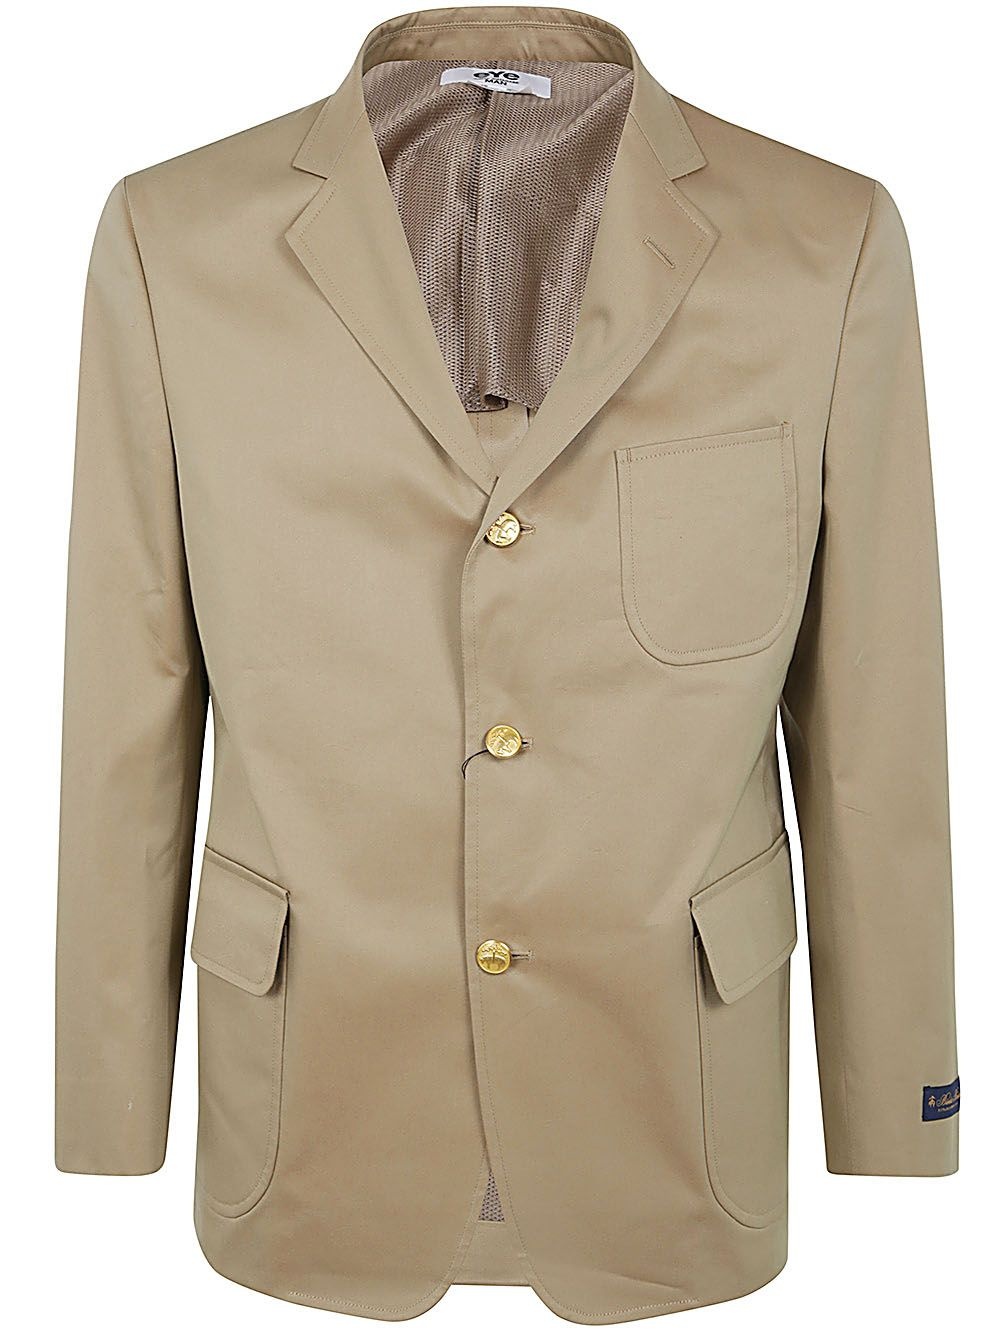 BROOKS BROTHERS COLLAB BOMBER JACKET - 1